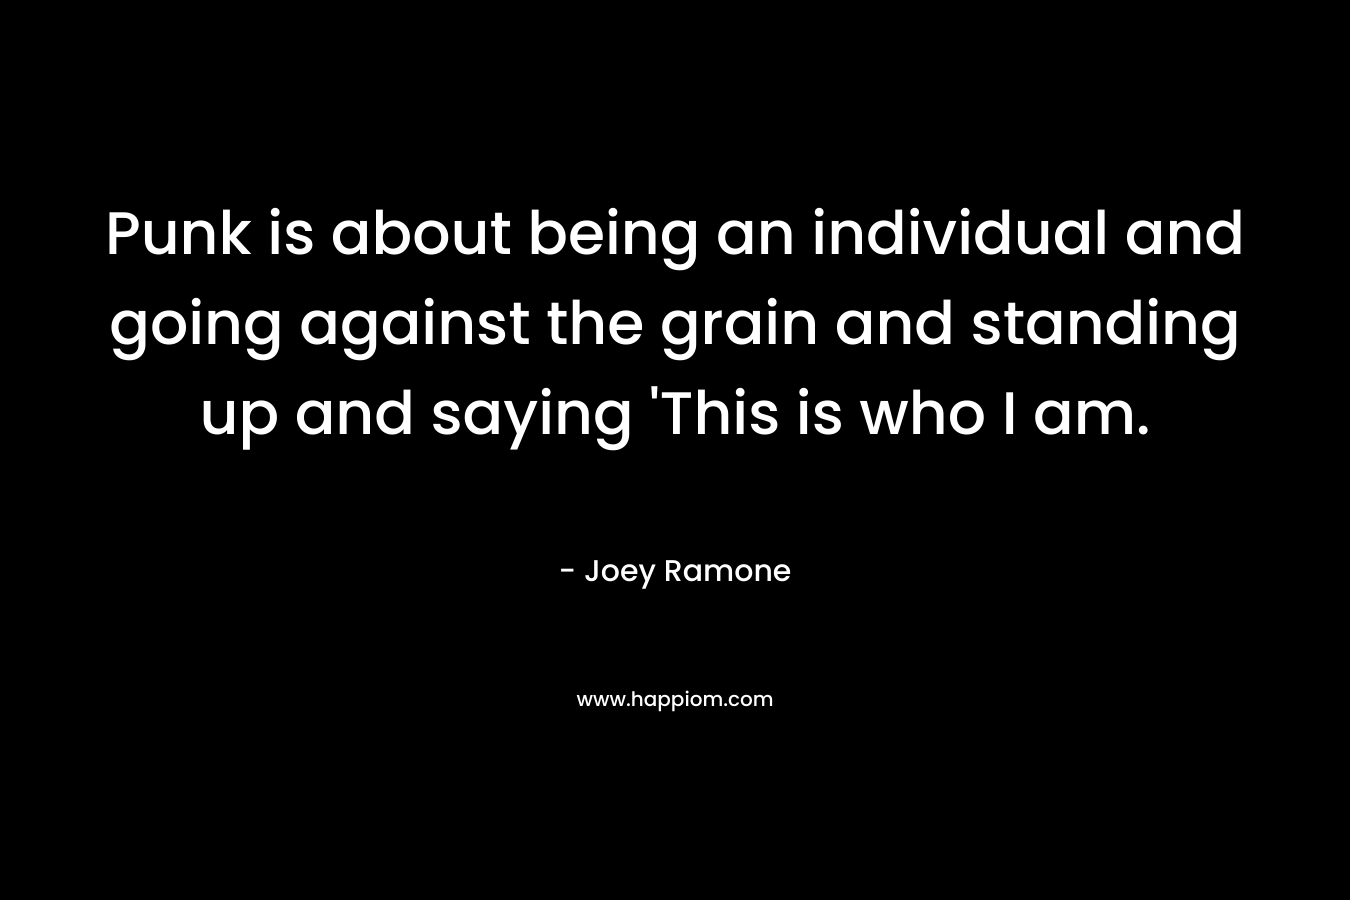 Punk is about being an individual and going against the grain and standing up and saying ‘This is who I am. – Joey Ramone